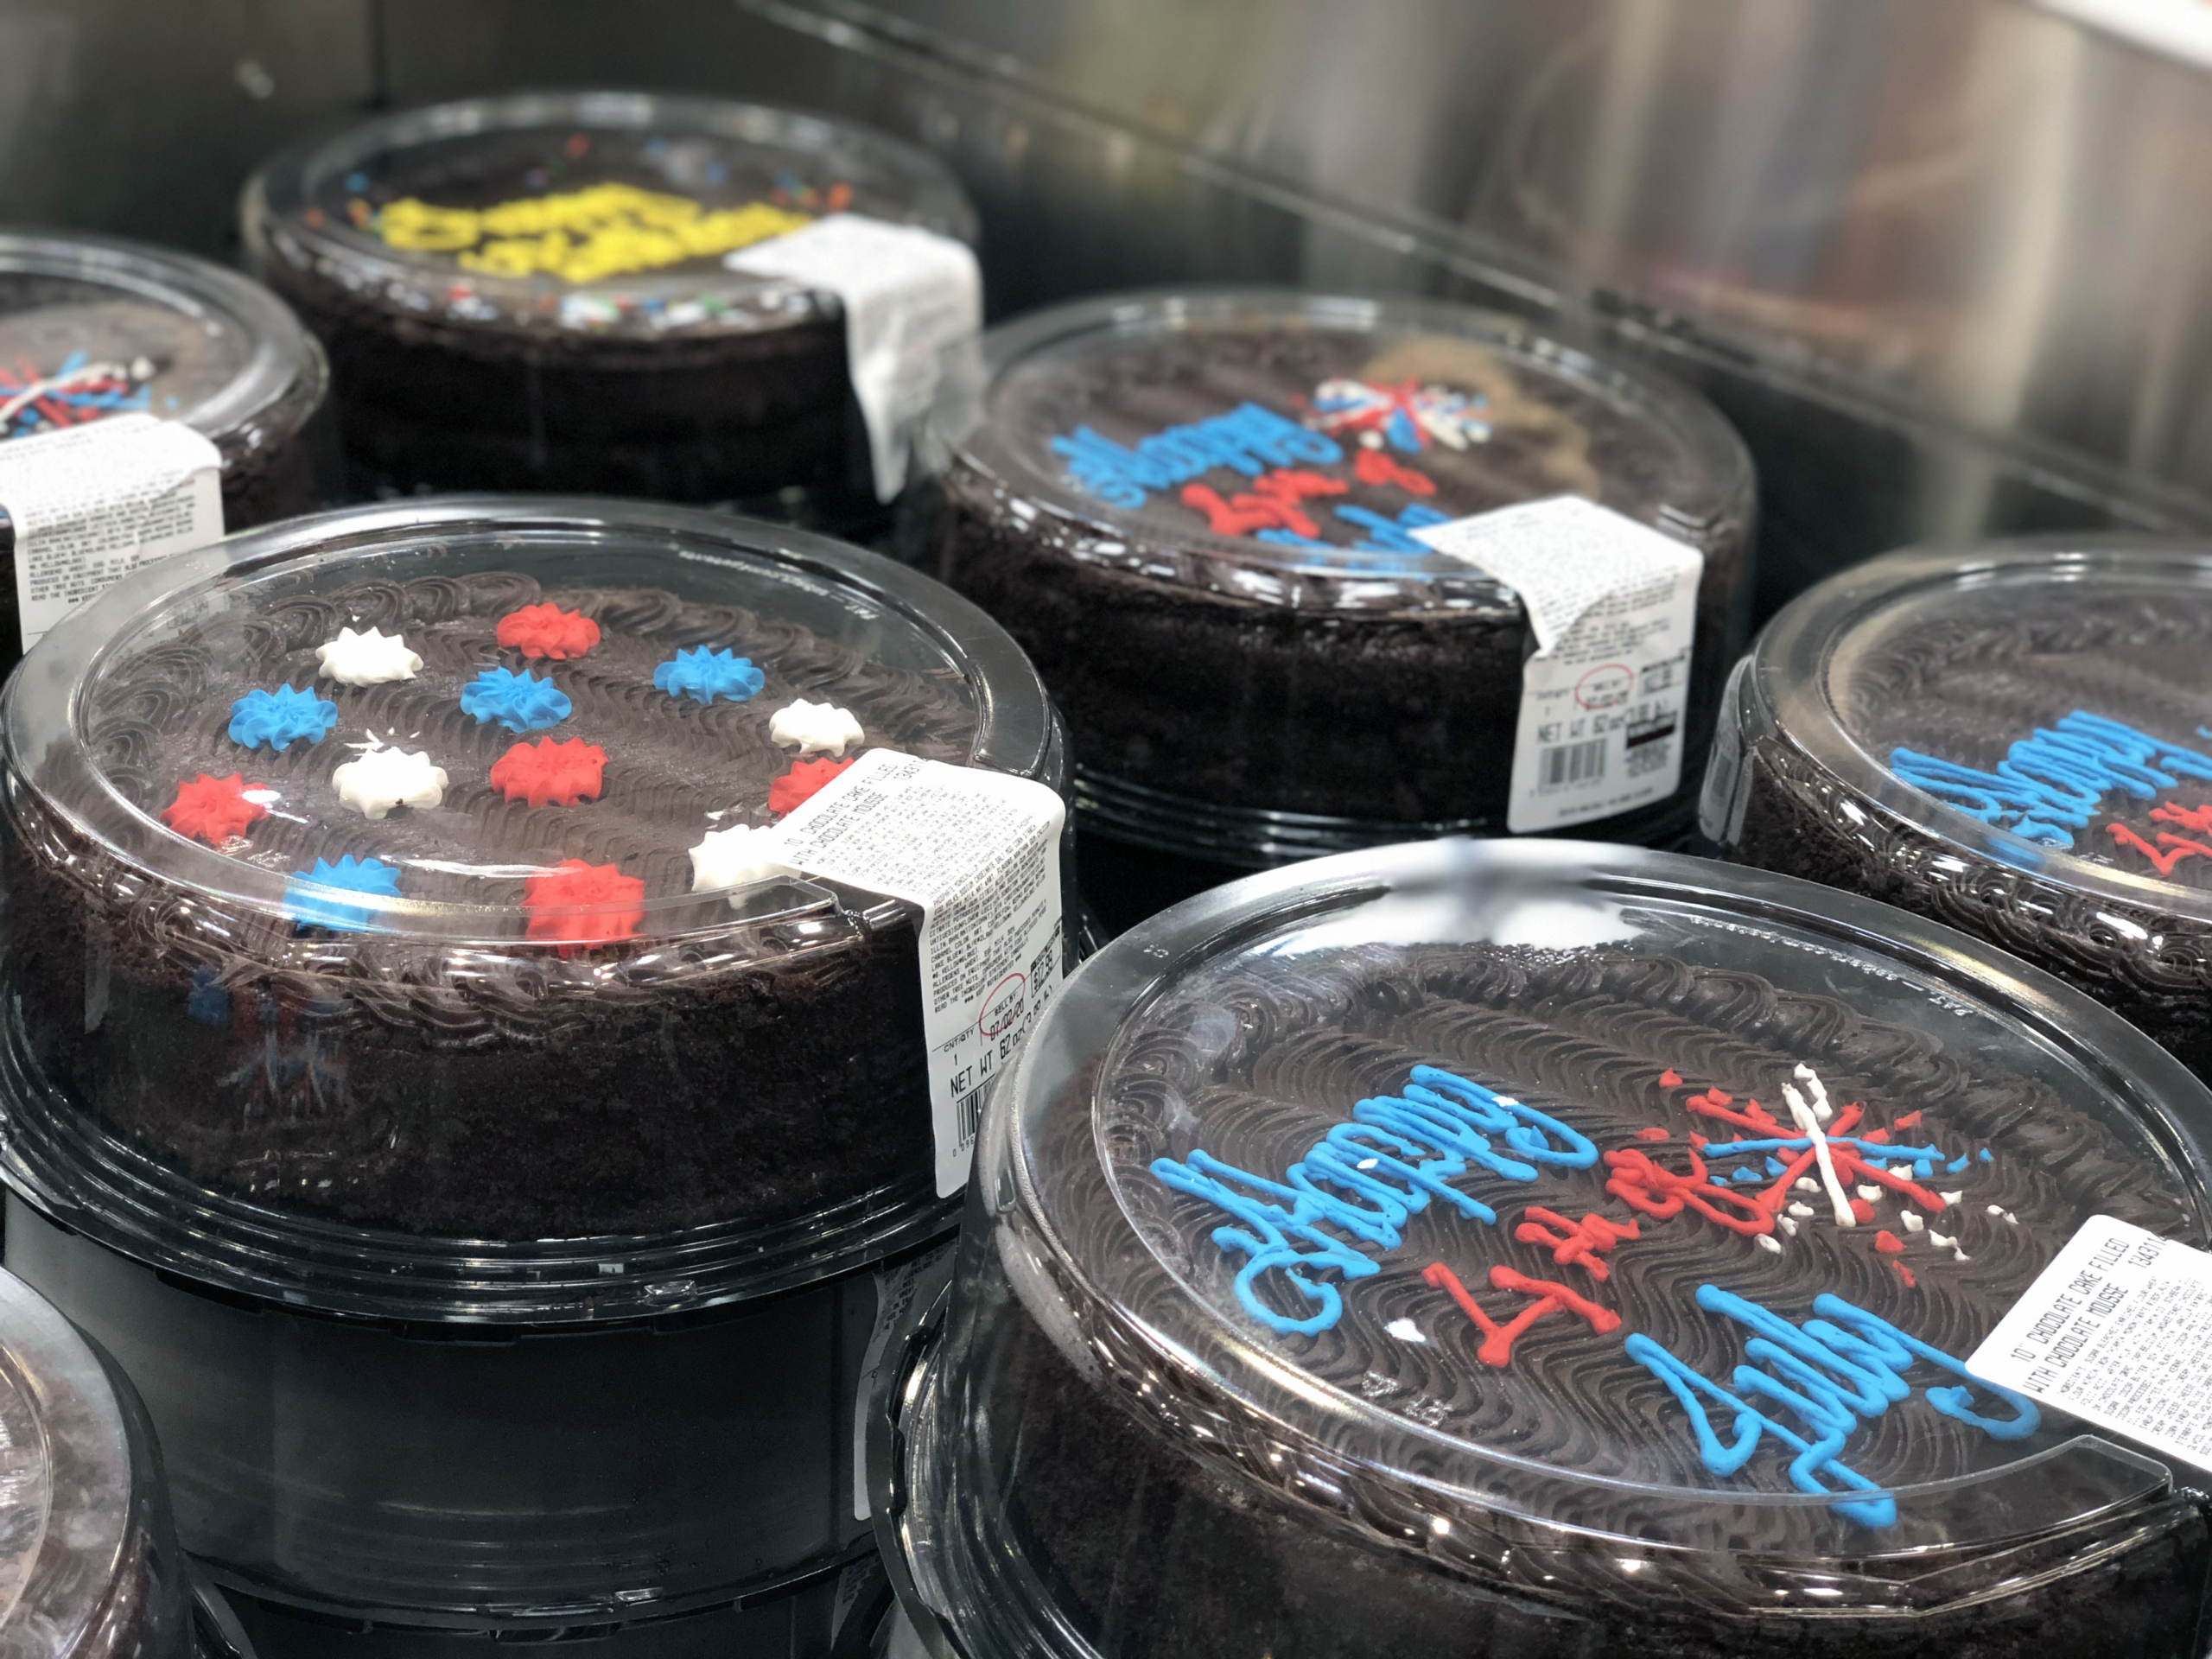 Costco 10" Round Fourth of July Cakes Are on Sale The Krazy Coupon Lady